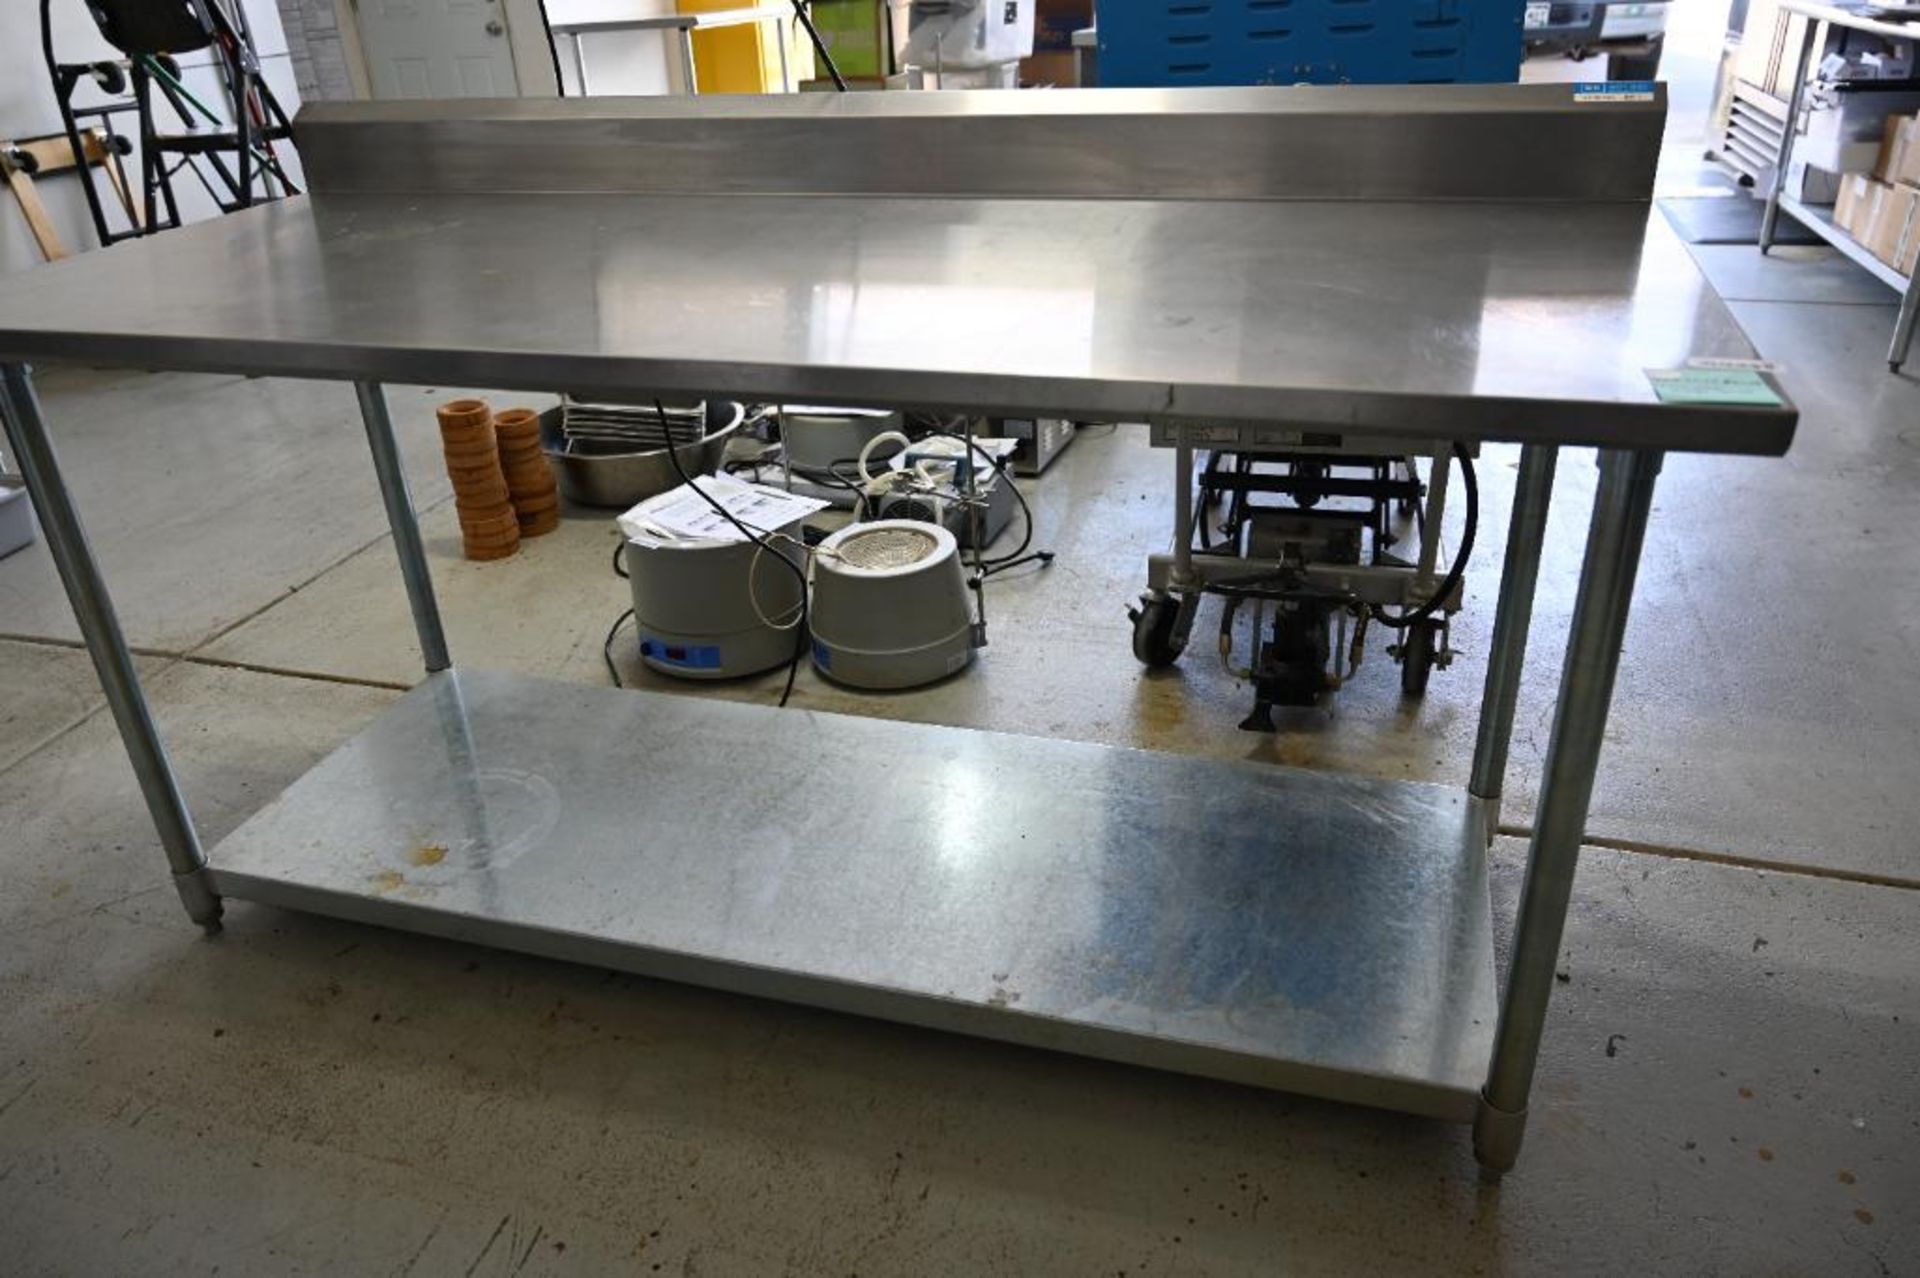 72" x 30.25"x 34.25" Stainless Steel Work Table with Back splash - Image 6 of 6